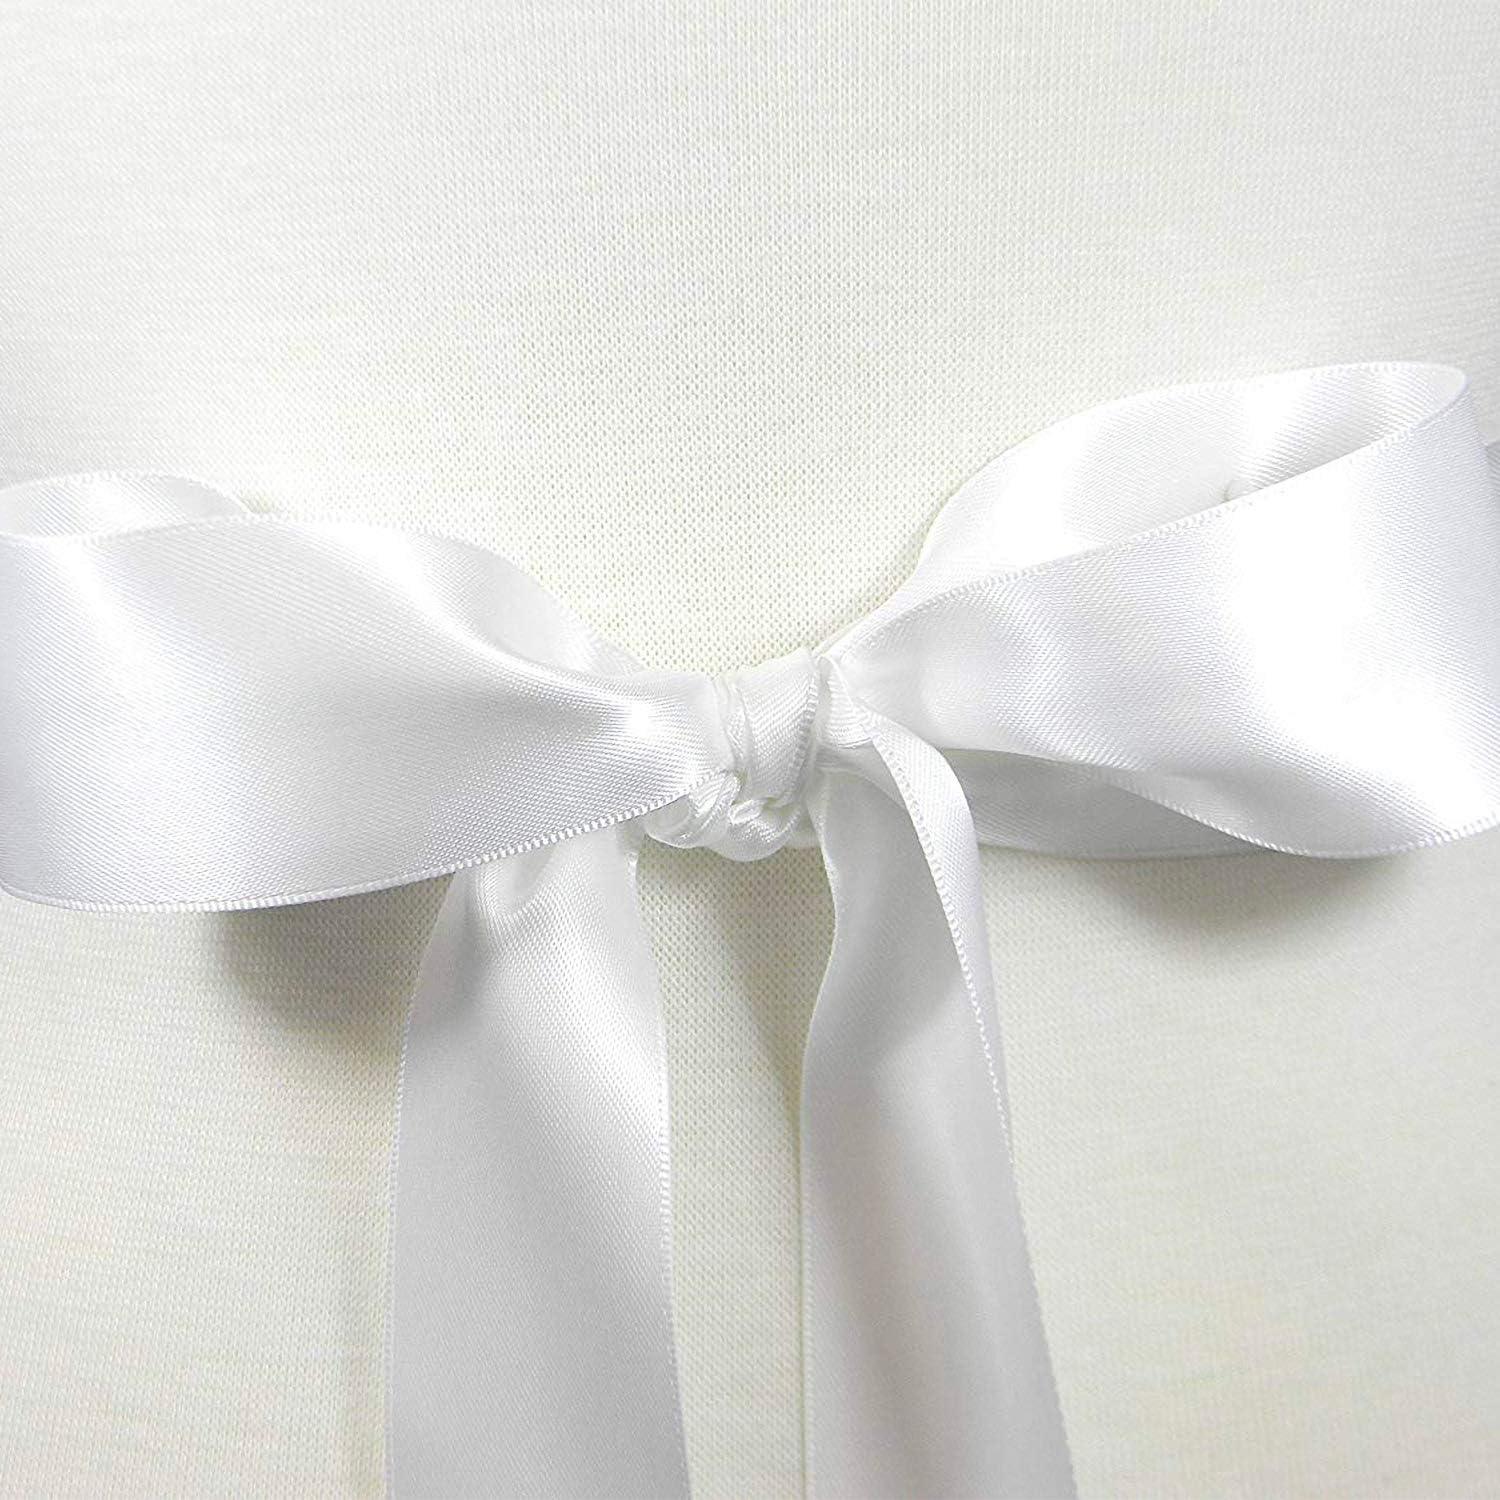 Double Faced Satin Ribbon 1.5 Inch White Ribbon 25 Yard Silk Fabric Ribbon  Perfect for Gift Wrapping Wedding Decoration Bow Making DIY Crafts (1-1/2